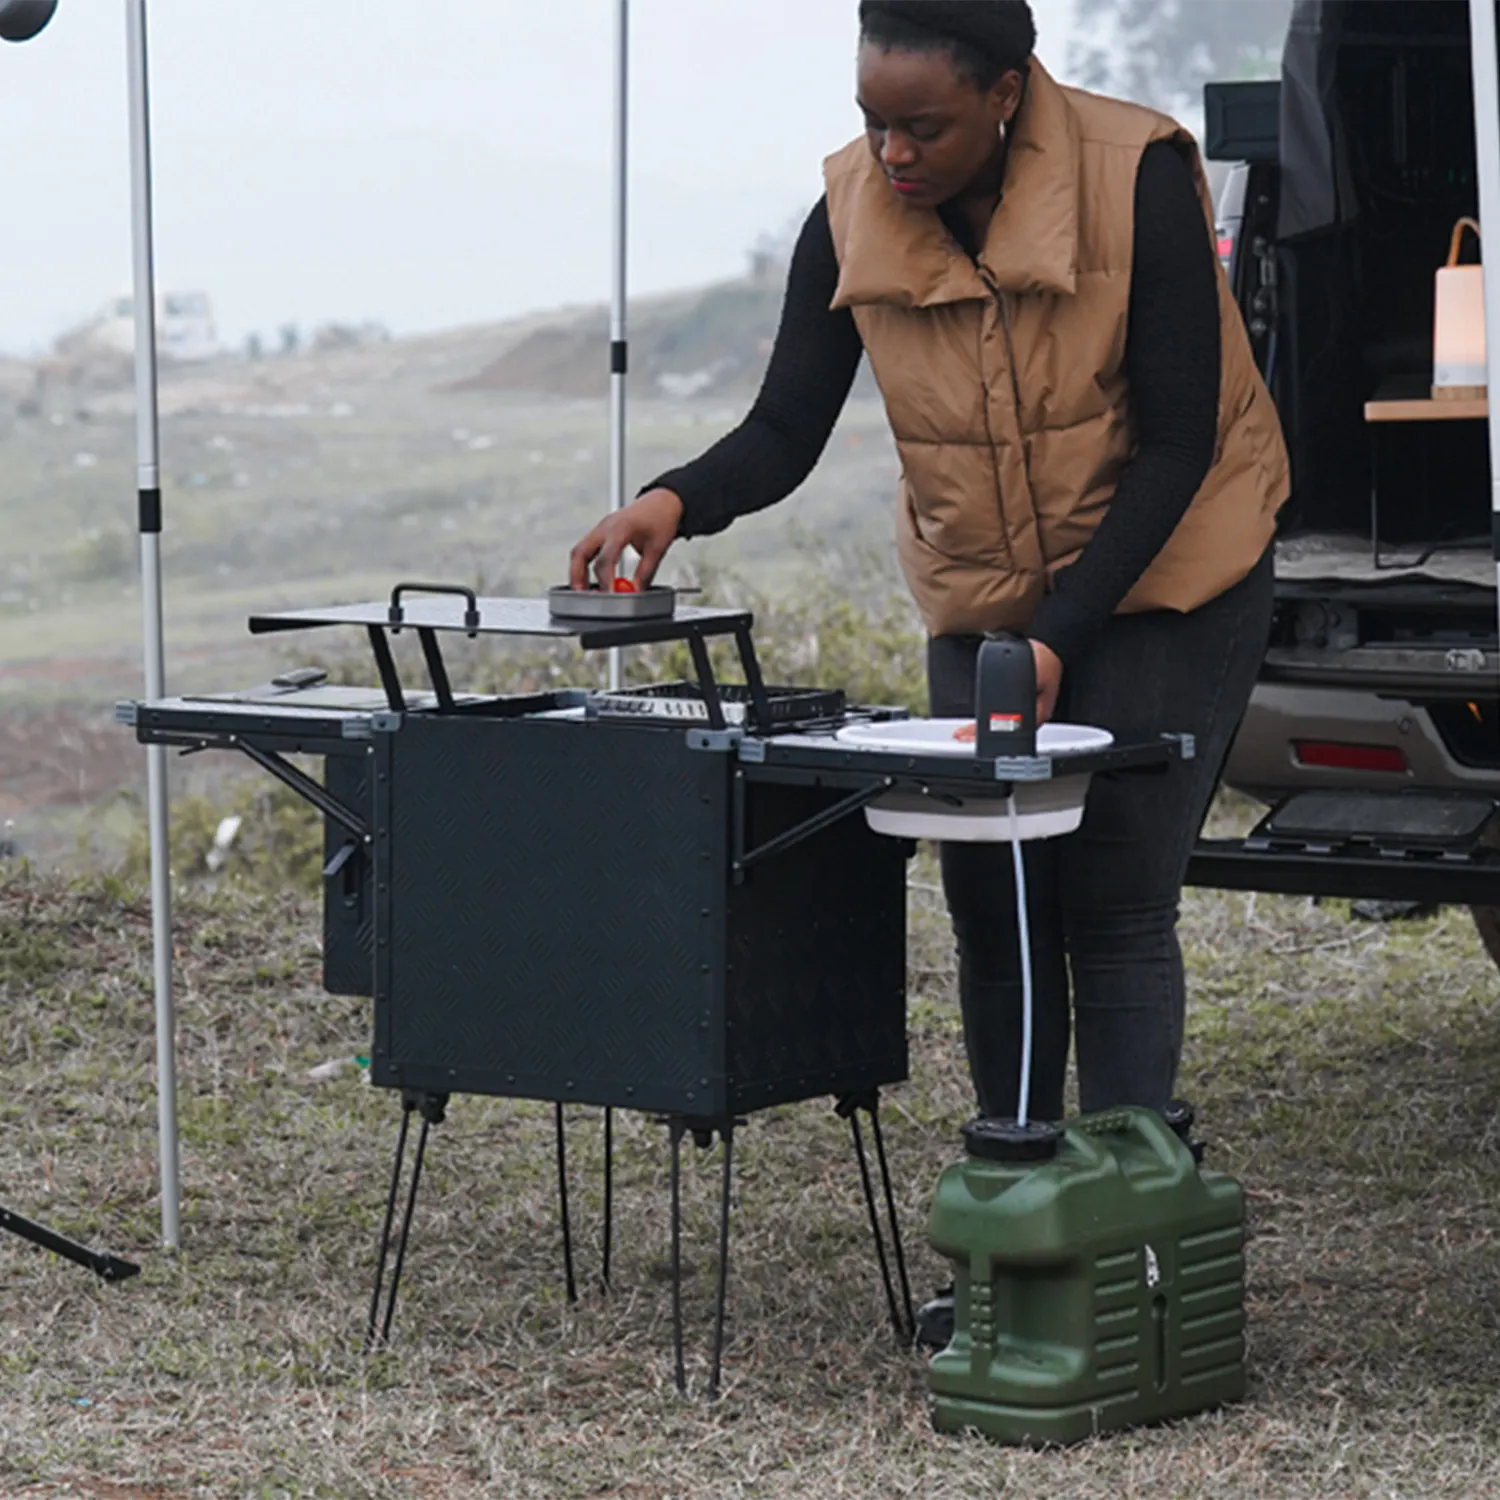 All-in-One Camping Kitchen Solution Wild Land Integrated Kitchen BoX - Gas Stove, BBQ, and More